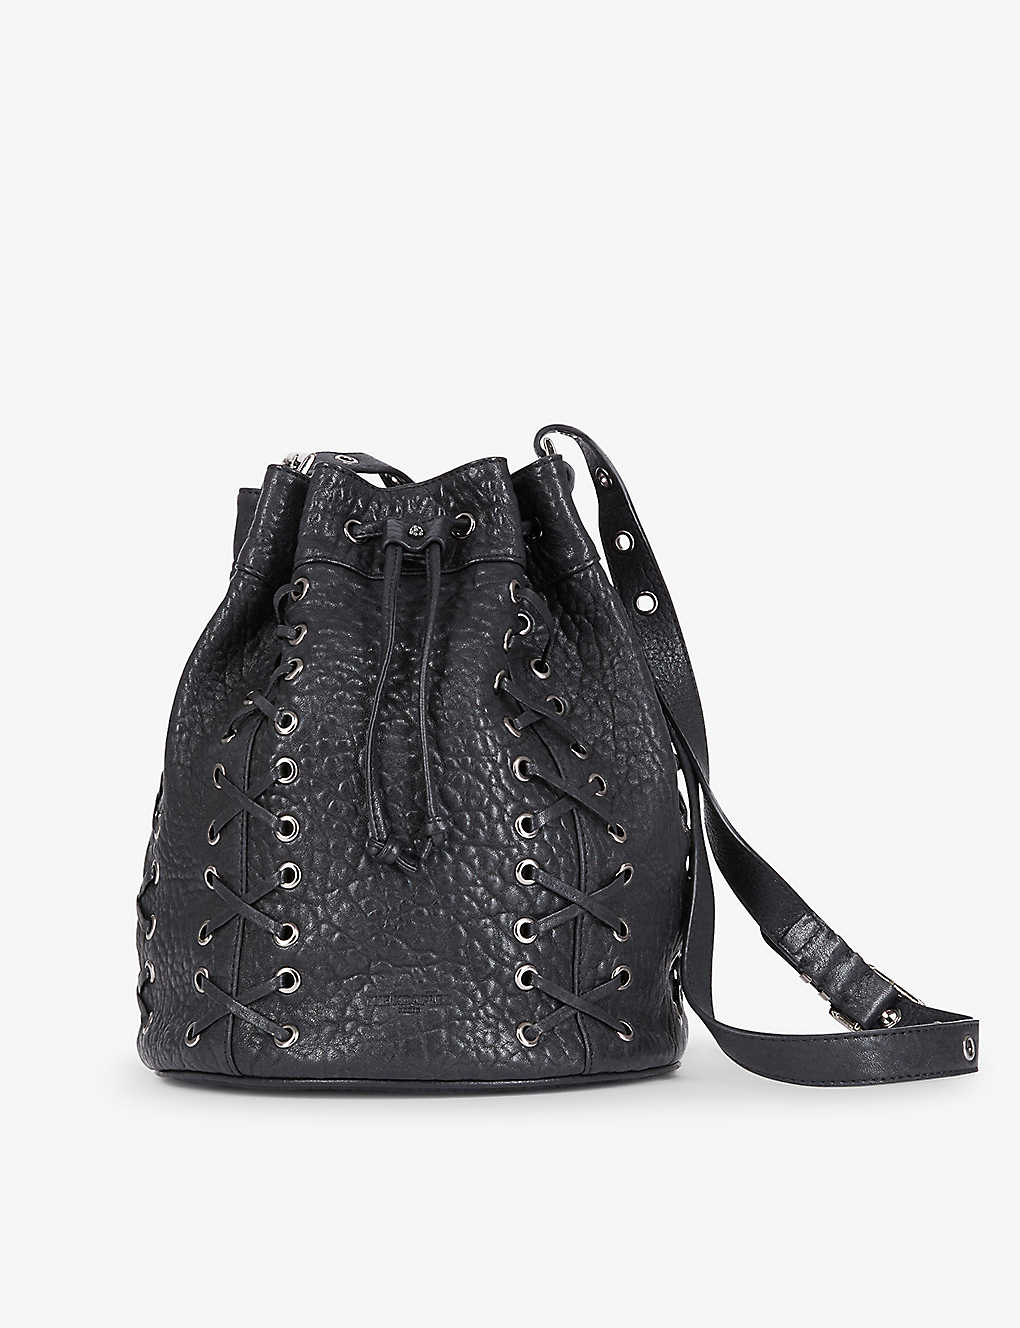 The Kooples Womens Black Laced Leather Bucket Bag